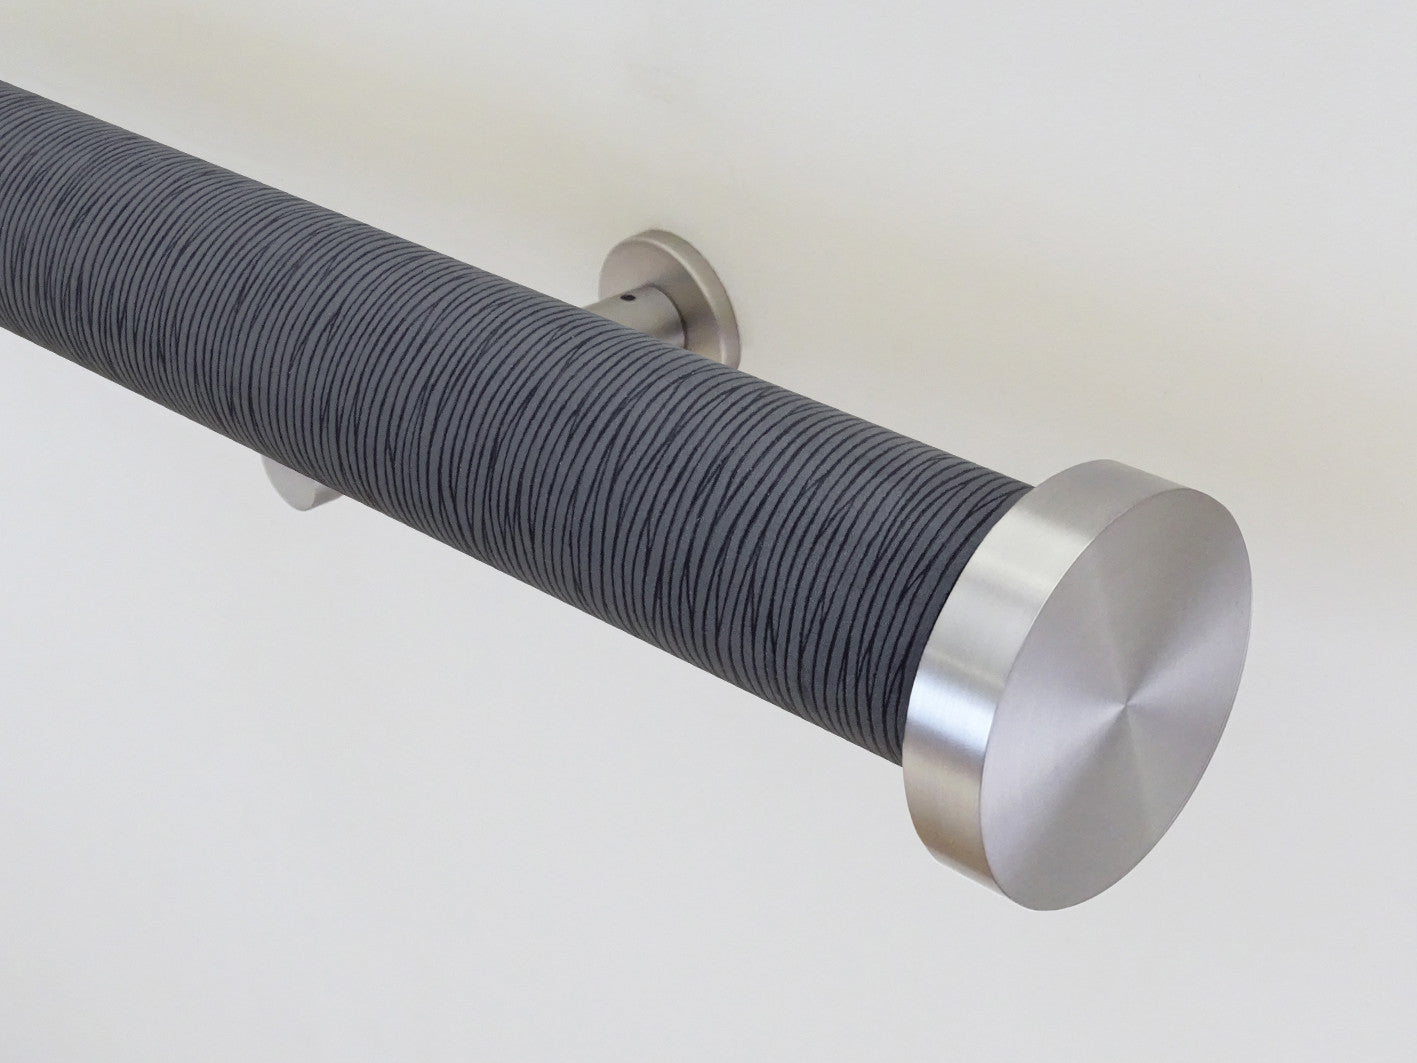 Striped "Flint" 50mm tracked curtain pole by Walcot House